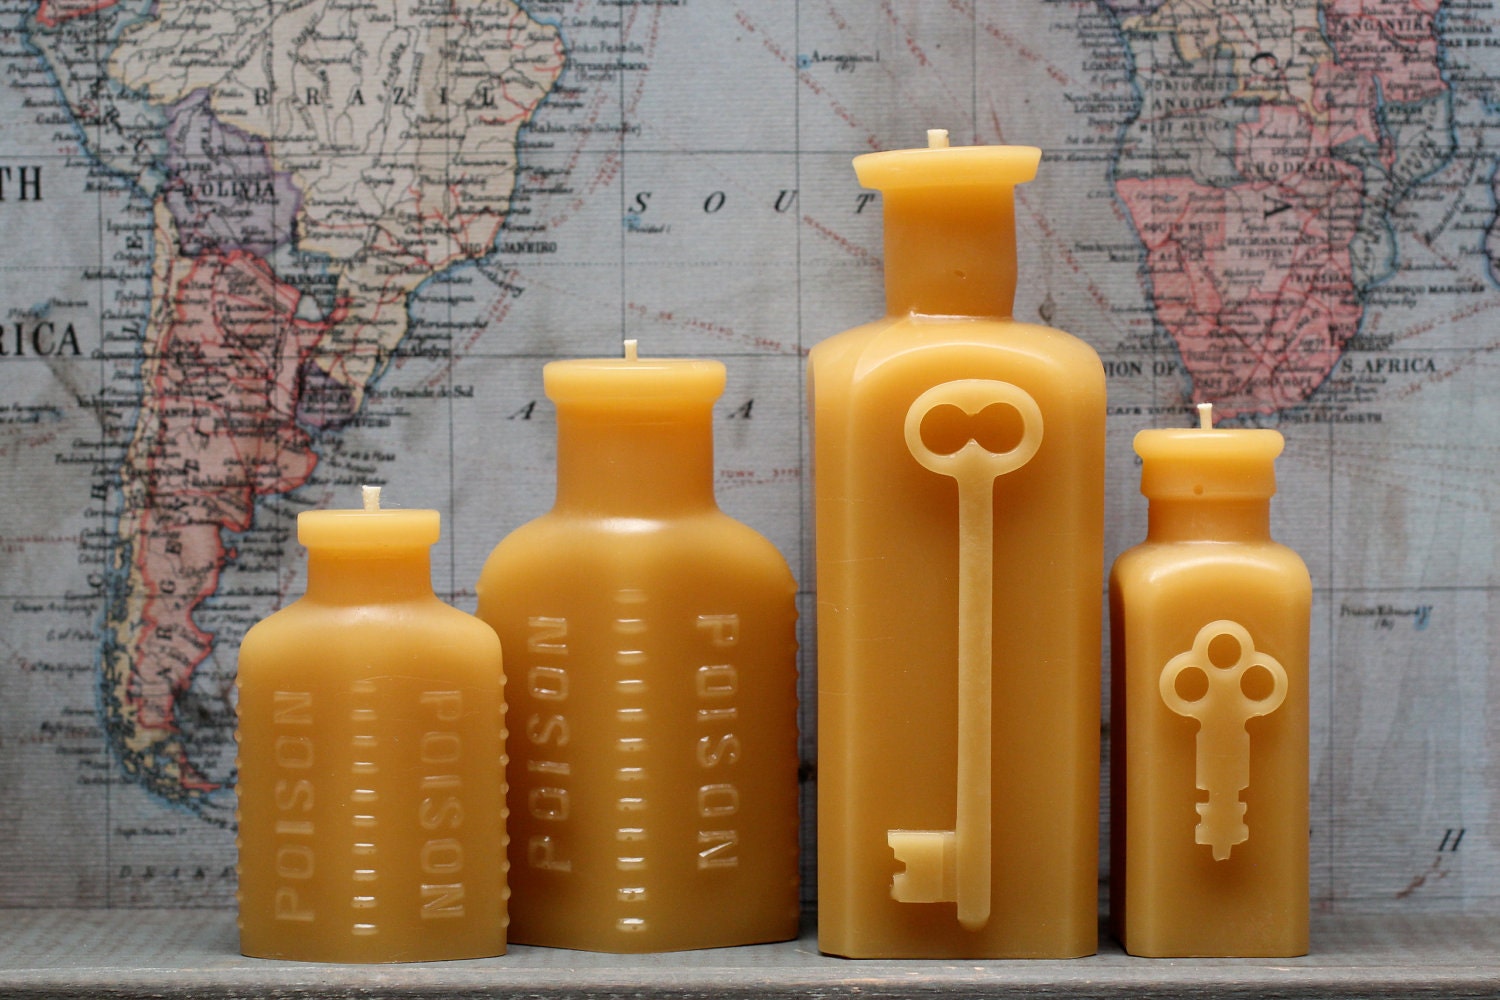 Beeswax Candle Collection - antique bottle shaped - "Two Keys - Two Poison" - by Pollen Arts -